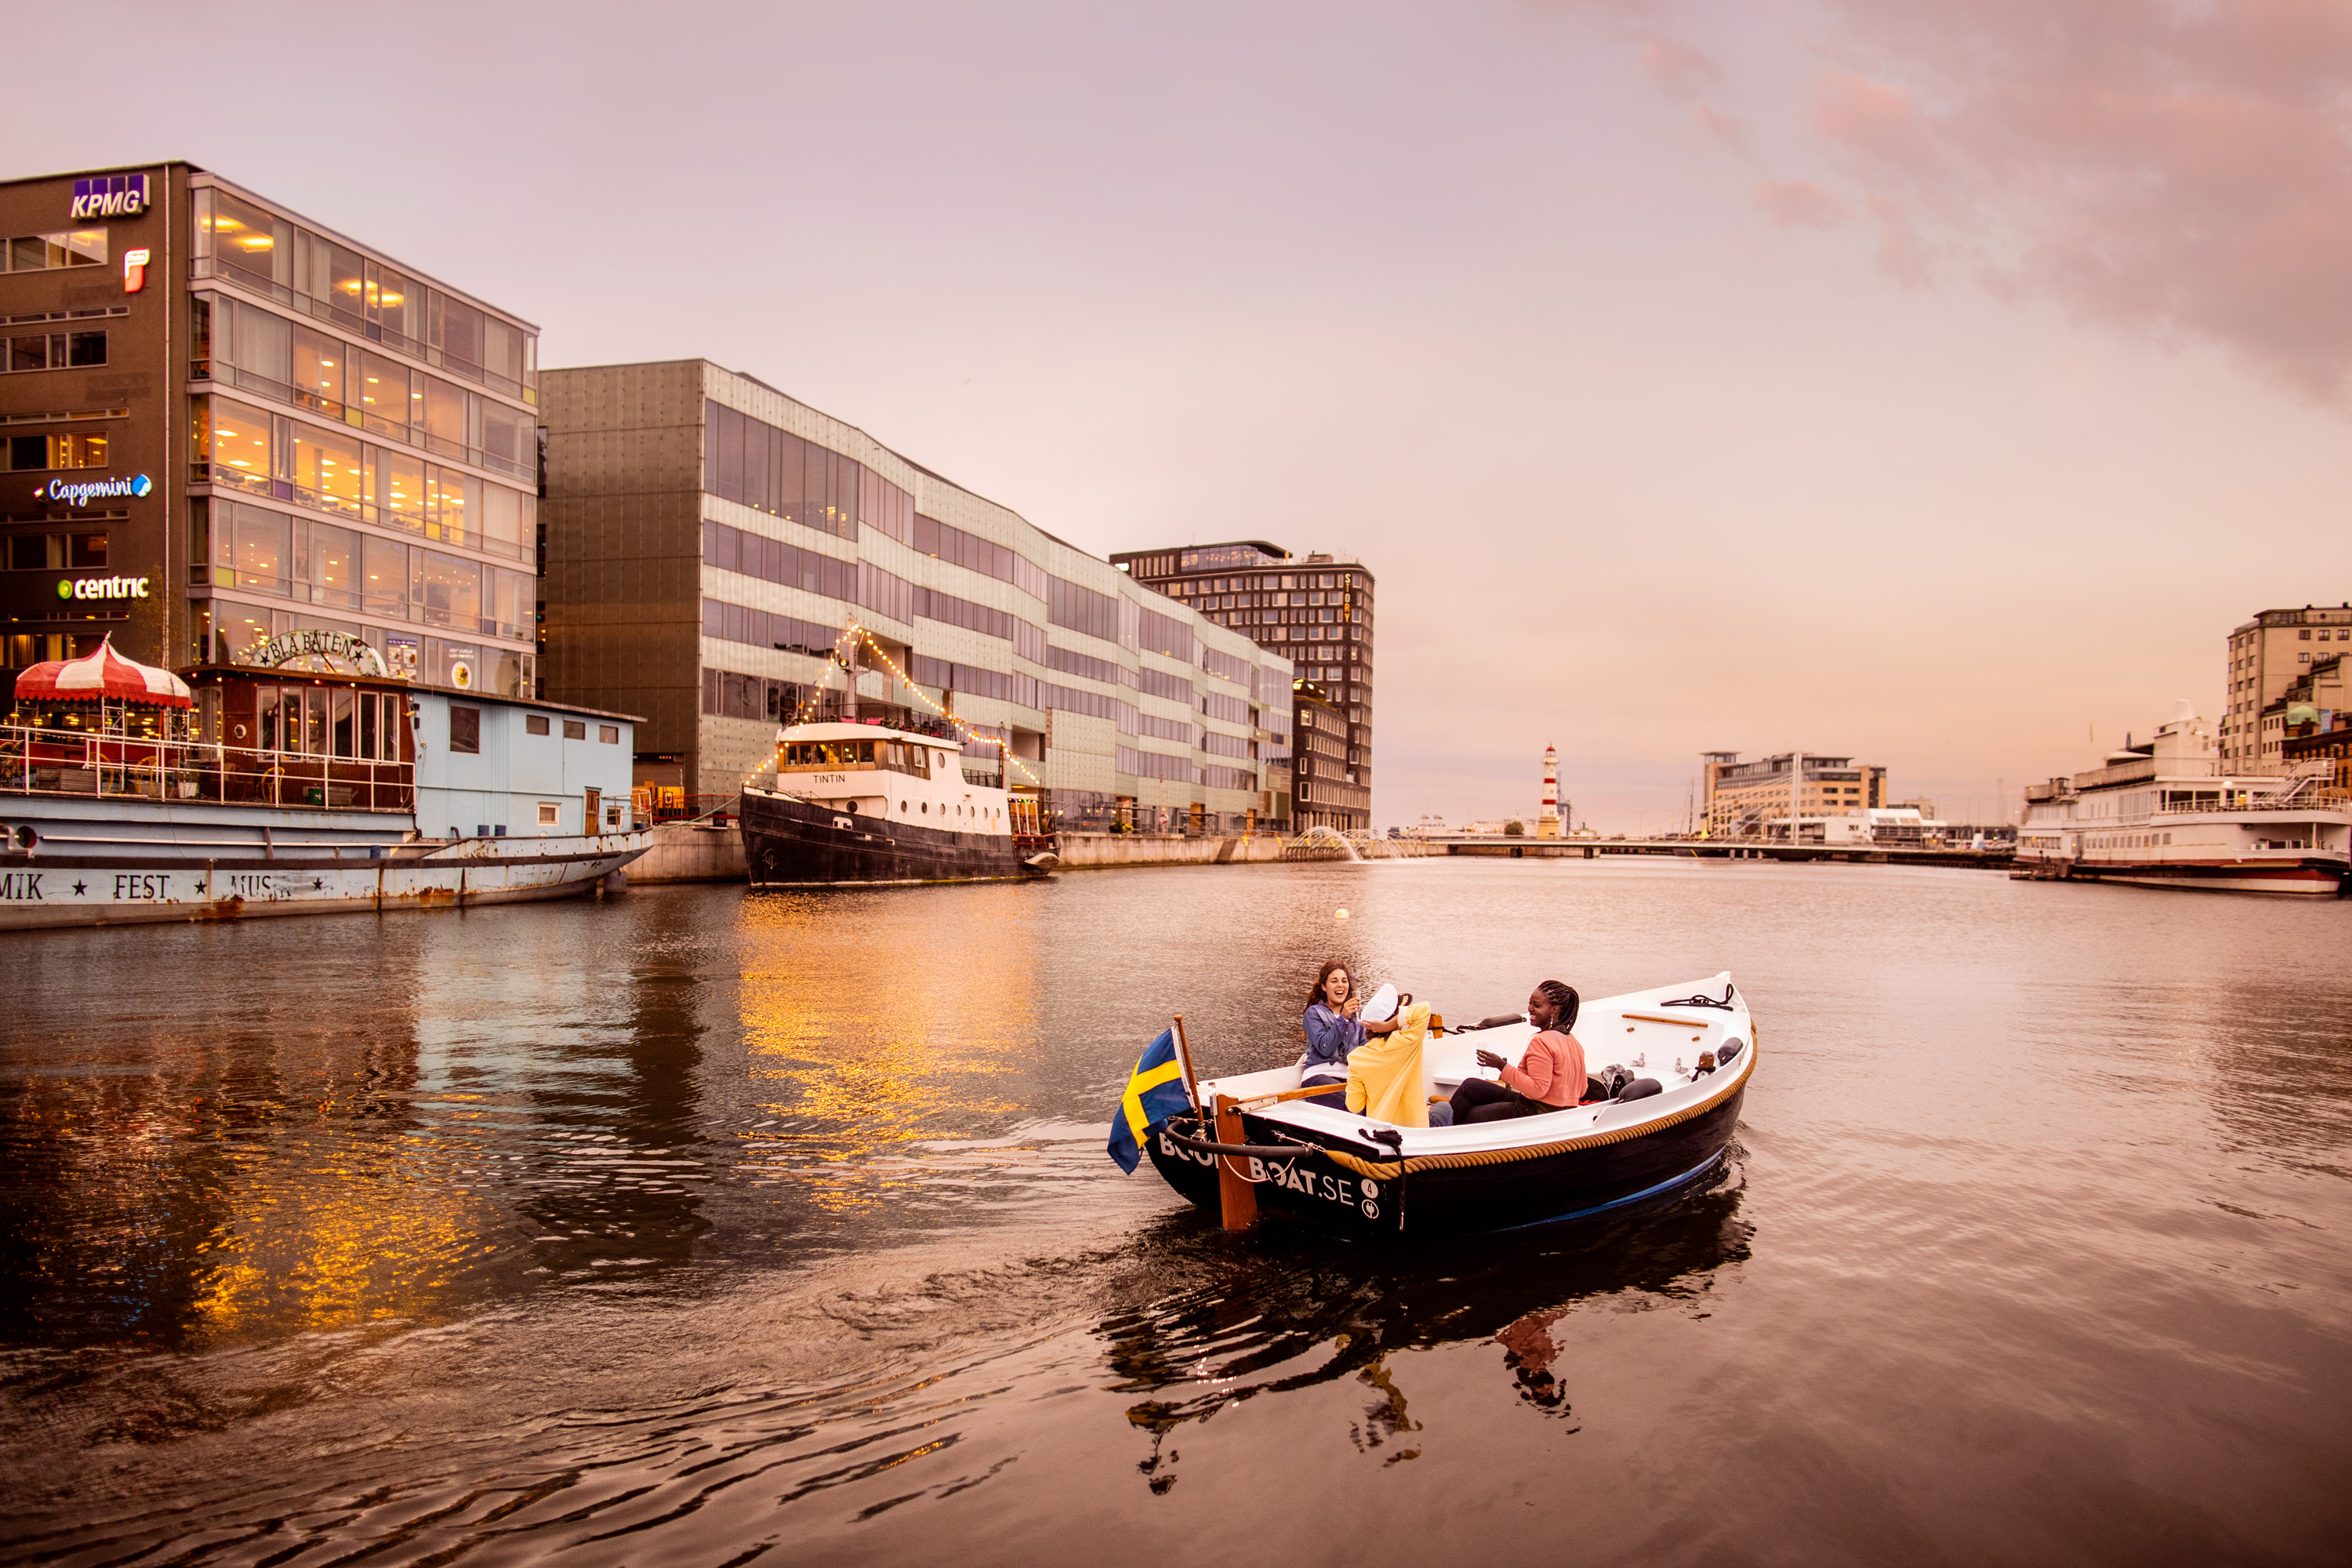 Three people take a boat ride on Malmö's canal with Malmö University in the background.